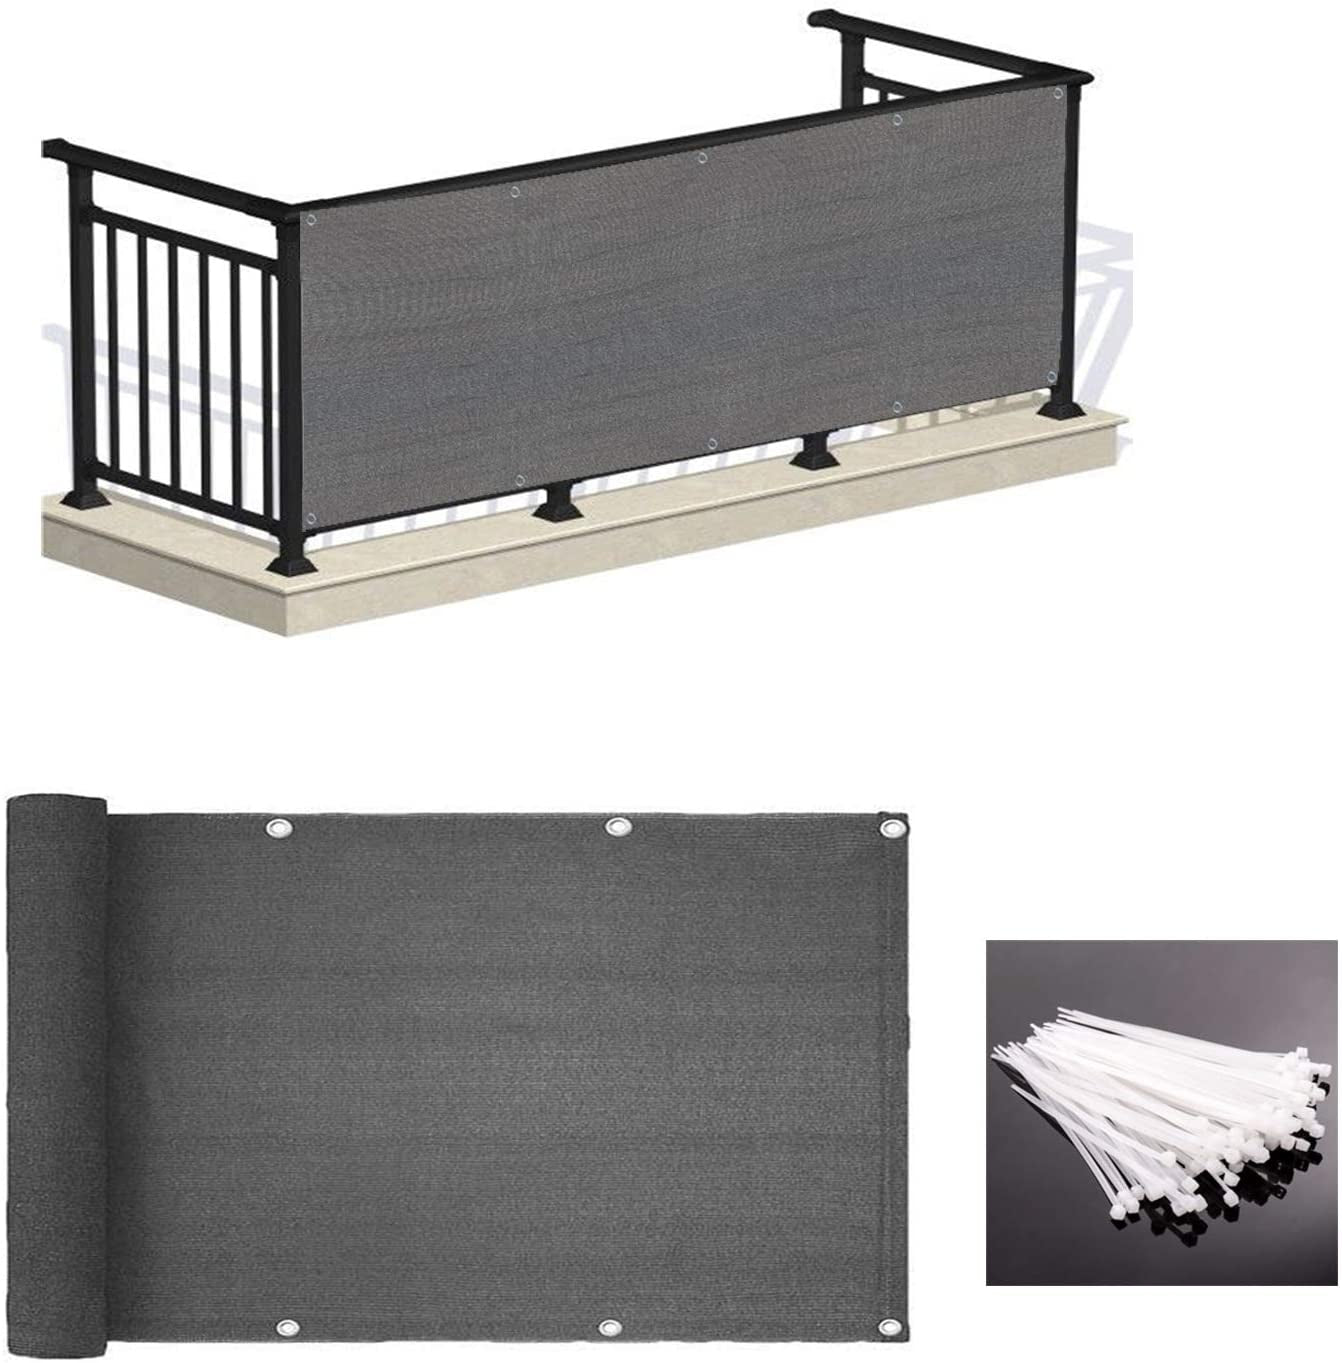 LOVE STORY, LOVE STORY Balcony Privacy Screen, 3' X 10' Black Deck Shield Screen Fence Cover,Uv Protection and Weather-Resistant,3 FT Height for Deck, Patio, Backyard, Outdoor Pool, Porch, Railing